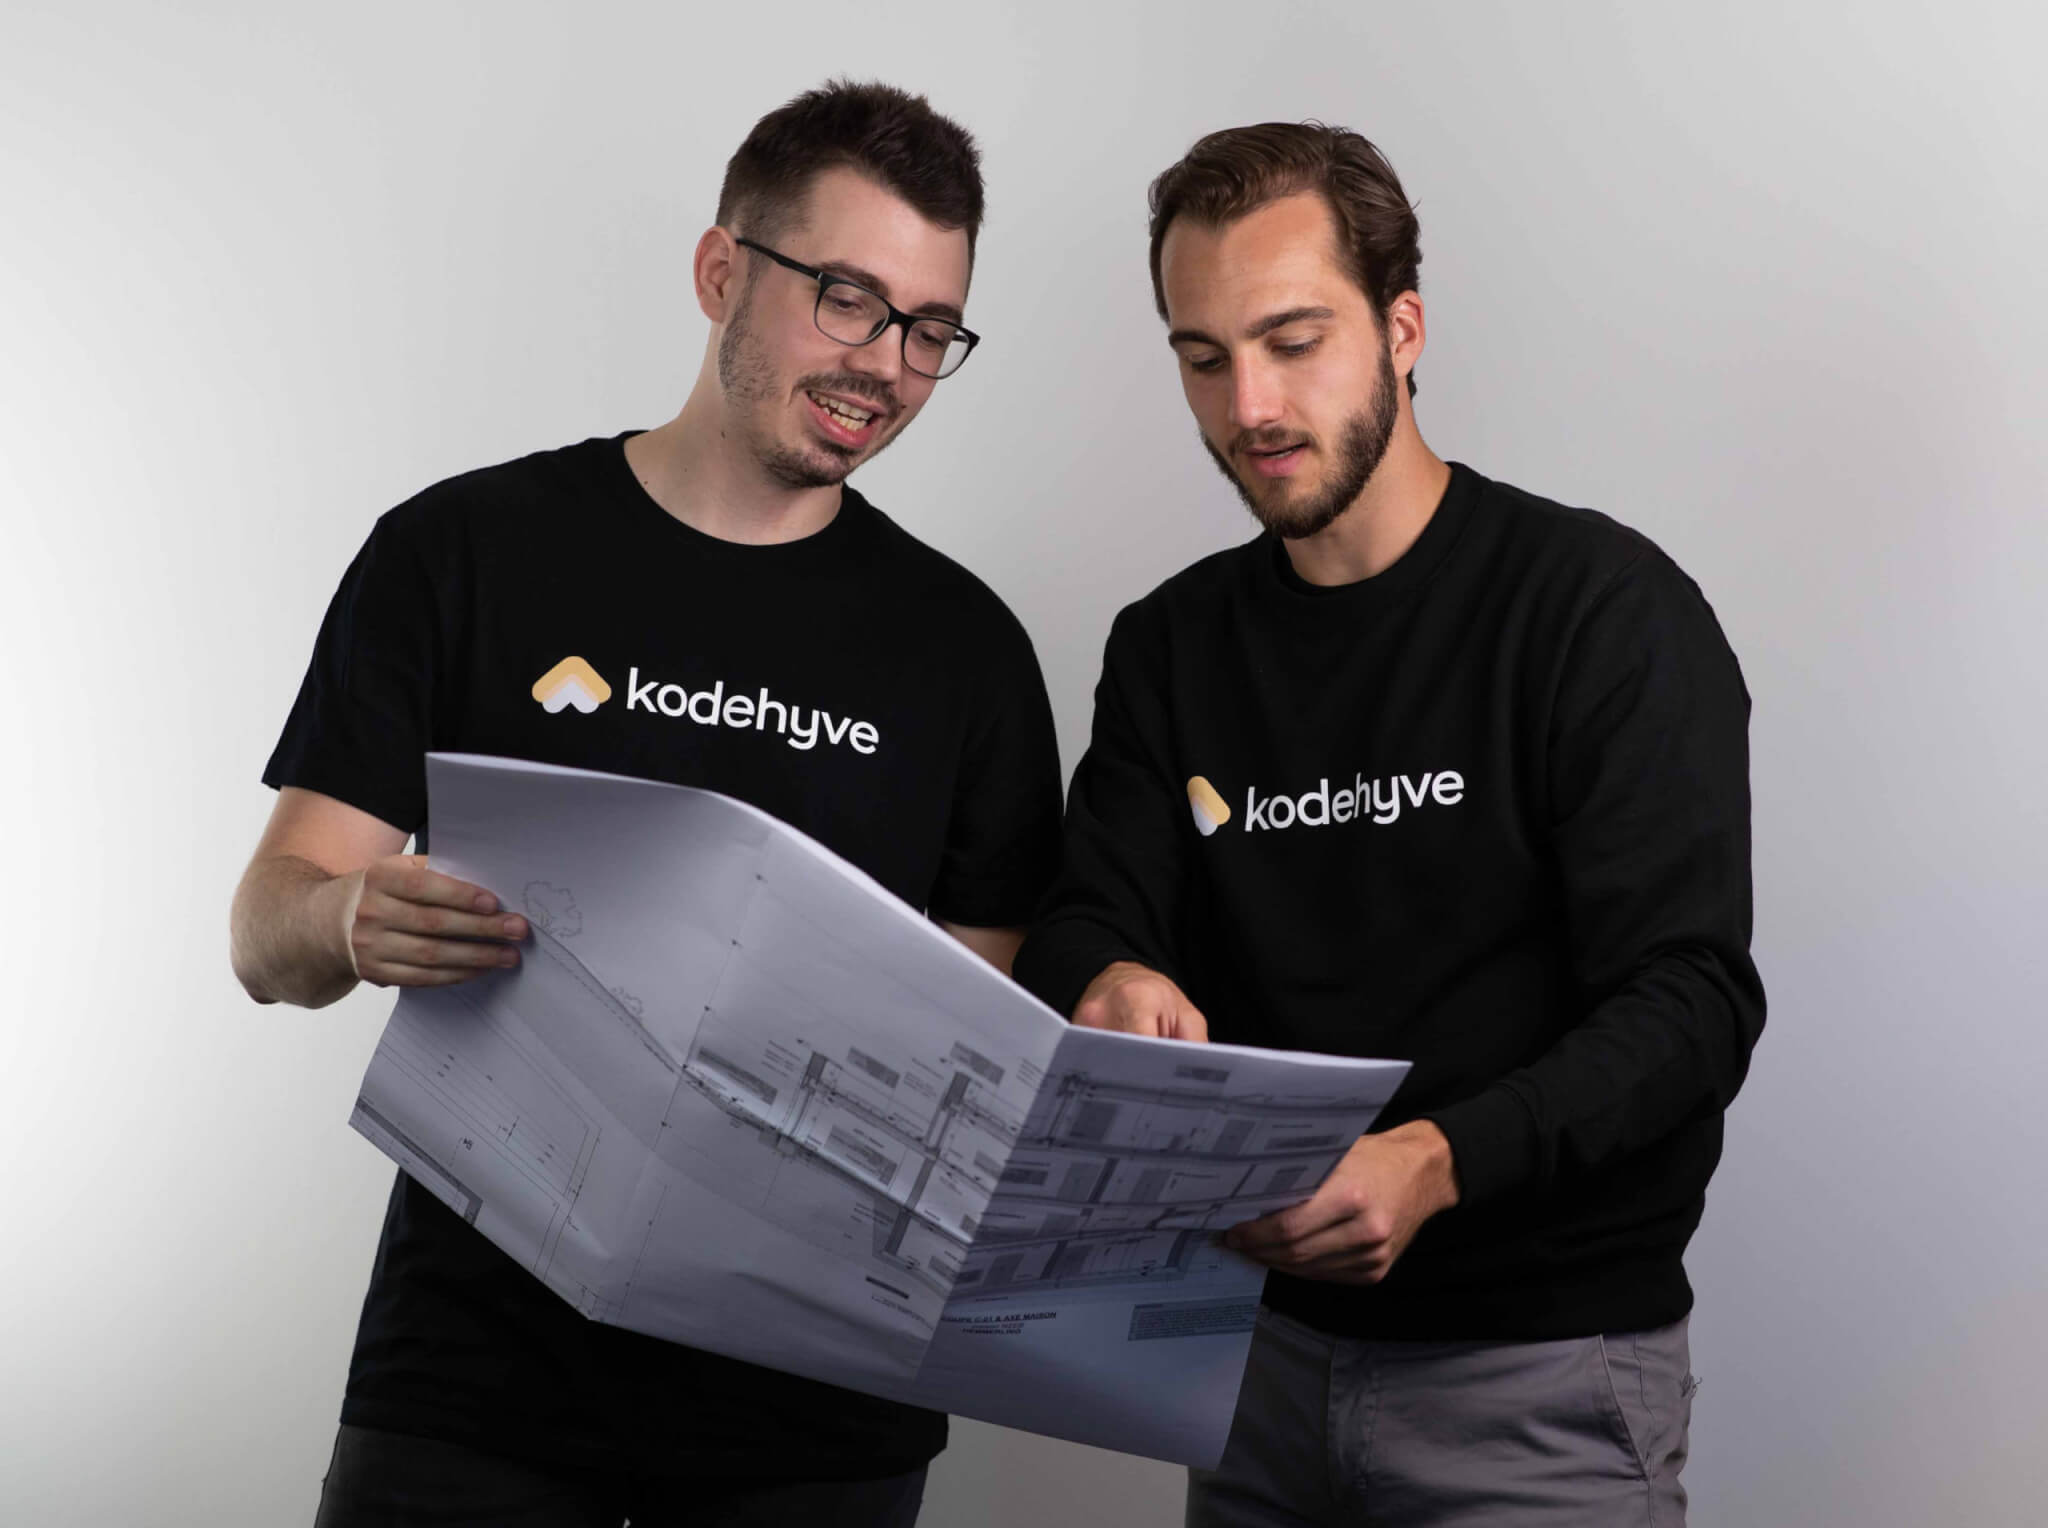 Kodehyve: Creating An Ecosystem Of Solutions